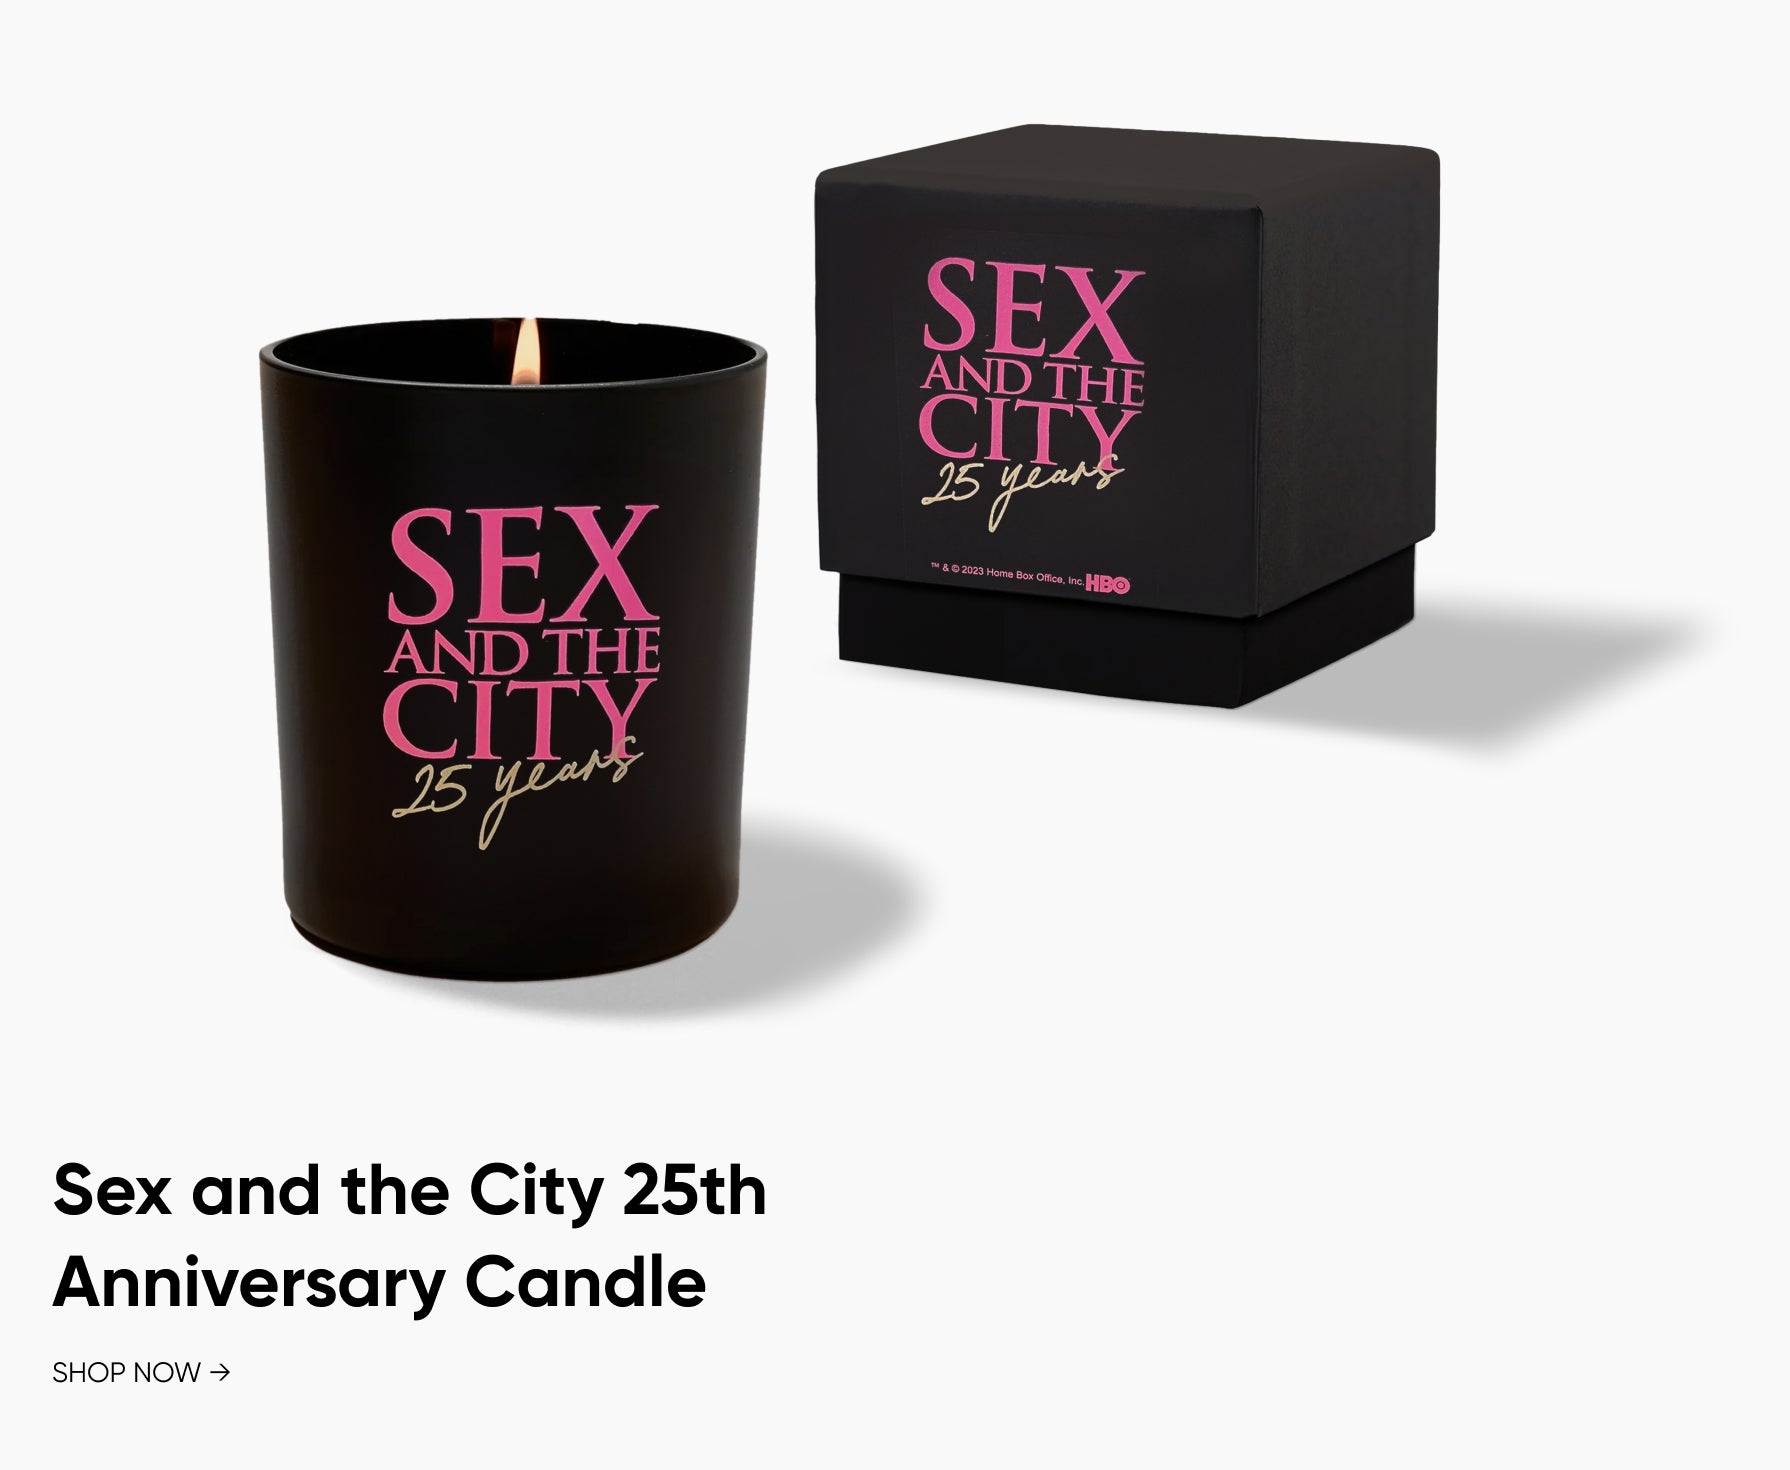 Sex and the City 25th Anniversary Candle